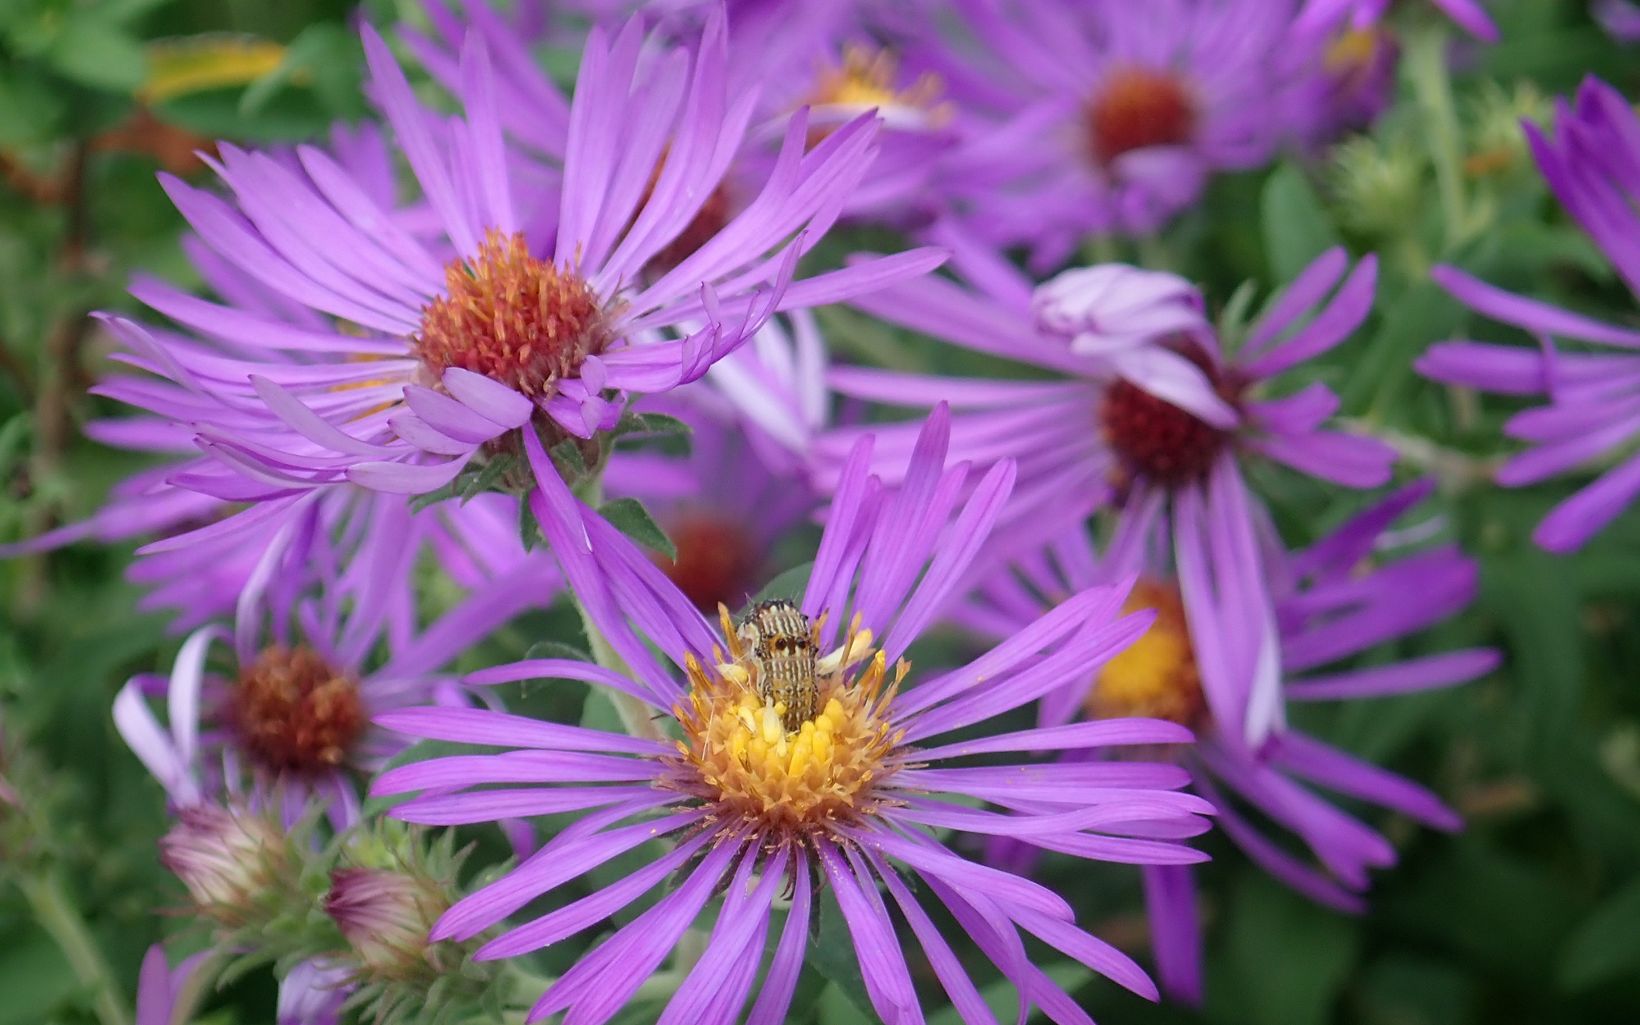 Bright purple New England Aster flowers are surrounded by green leaves.